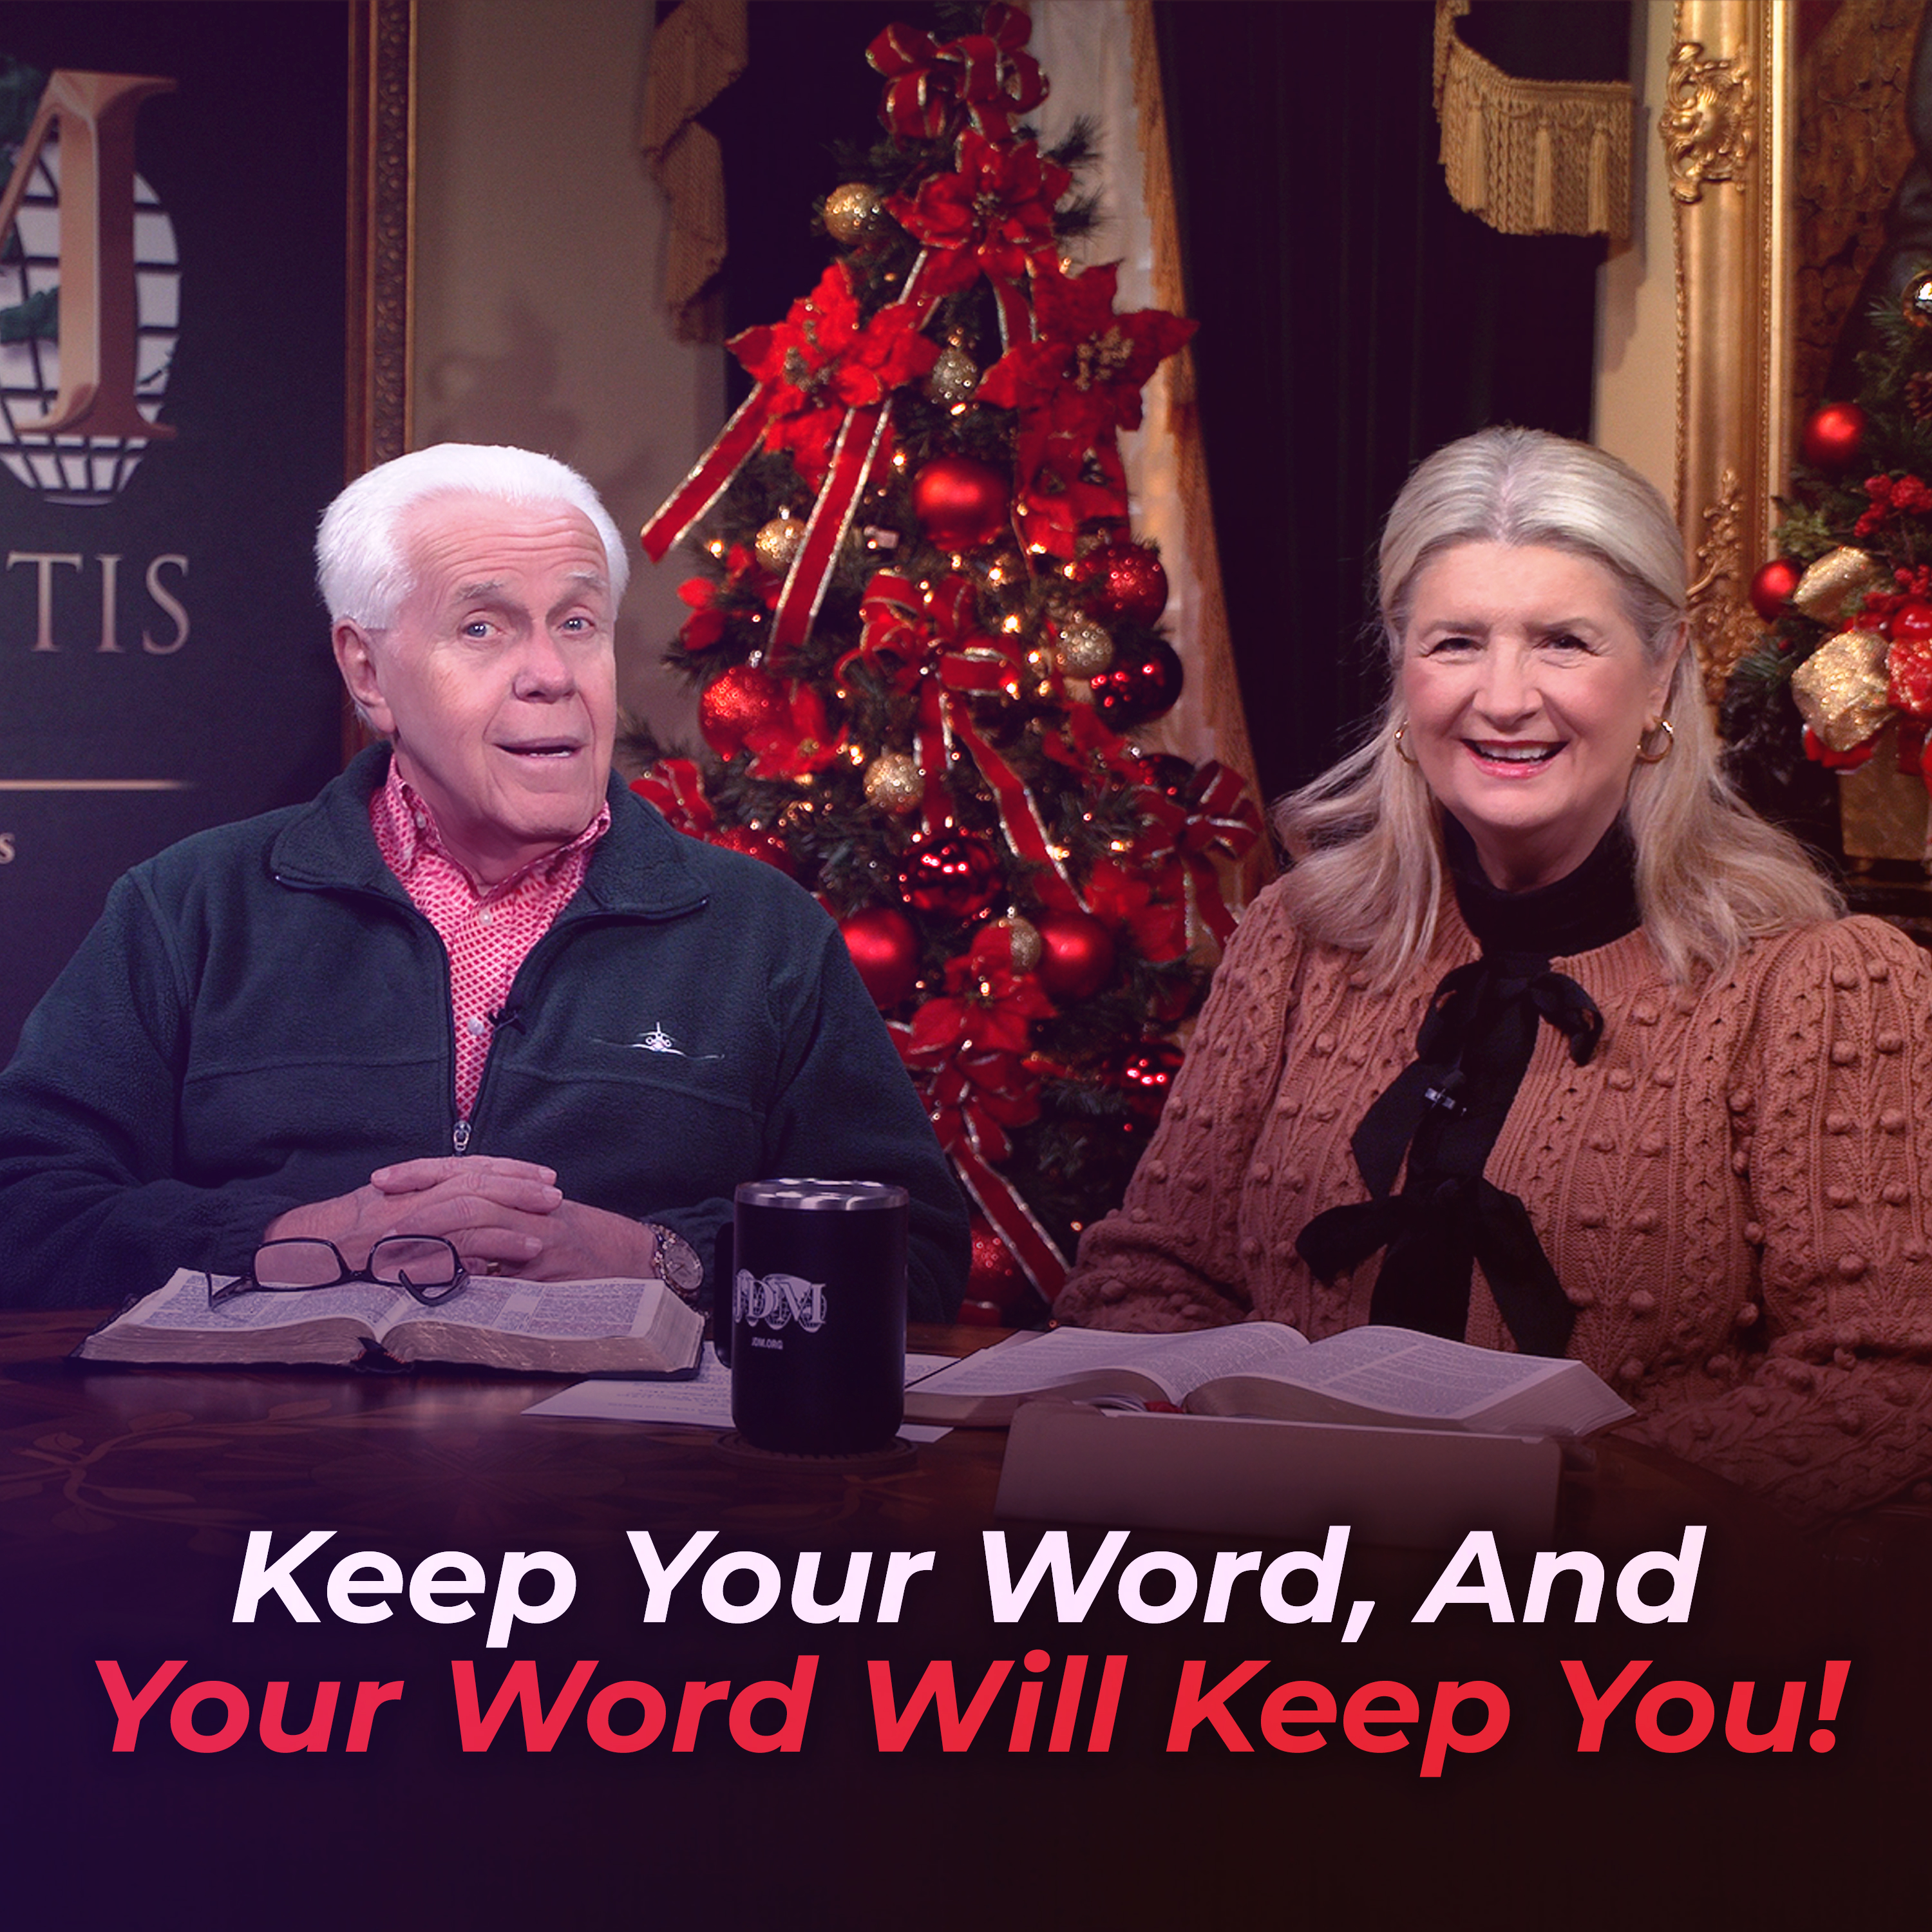 Keep Your Word, and Your Word will Keep You!